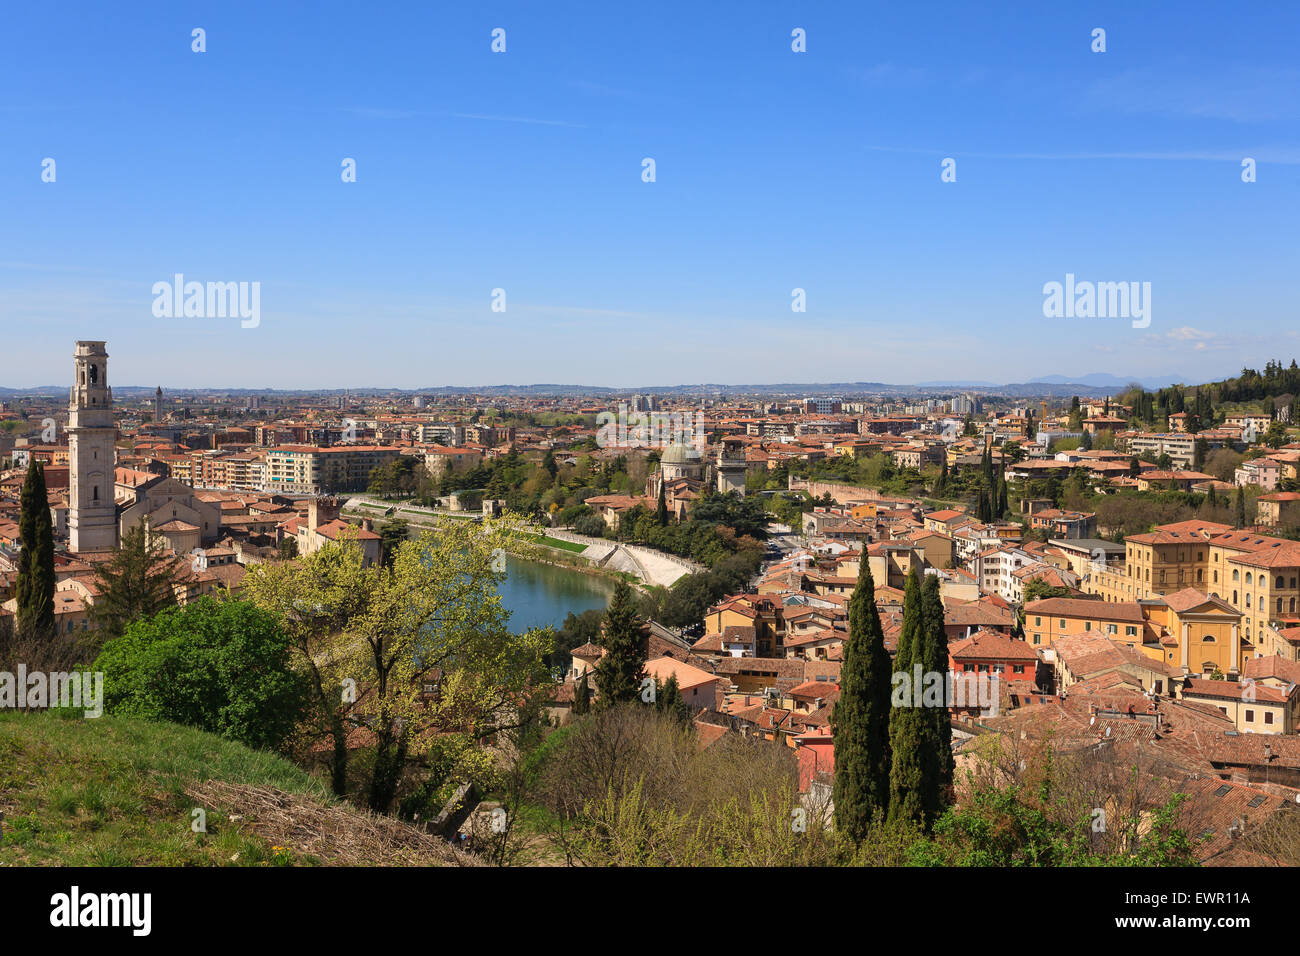 A view of Verona and Adige river from top of a hill, Italy Stock Photo